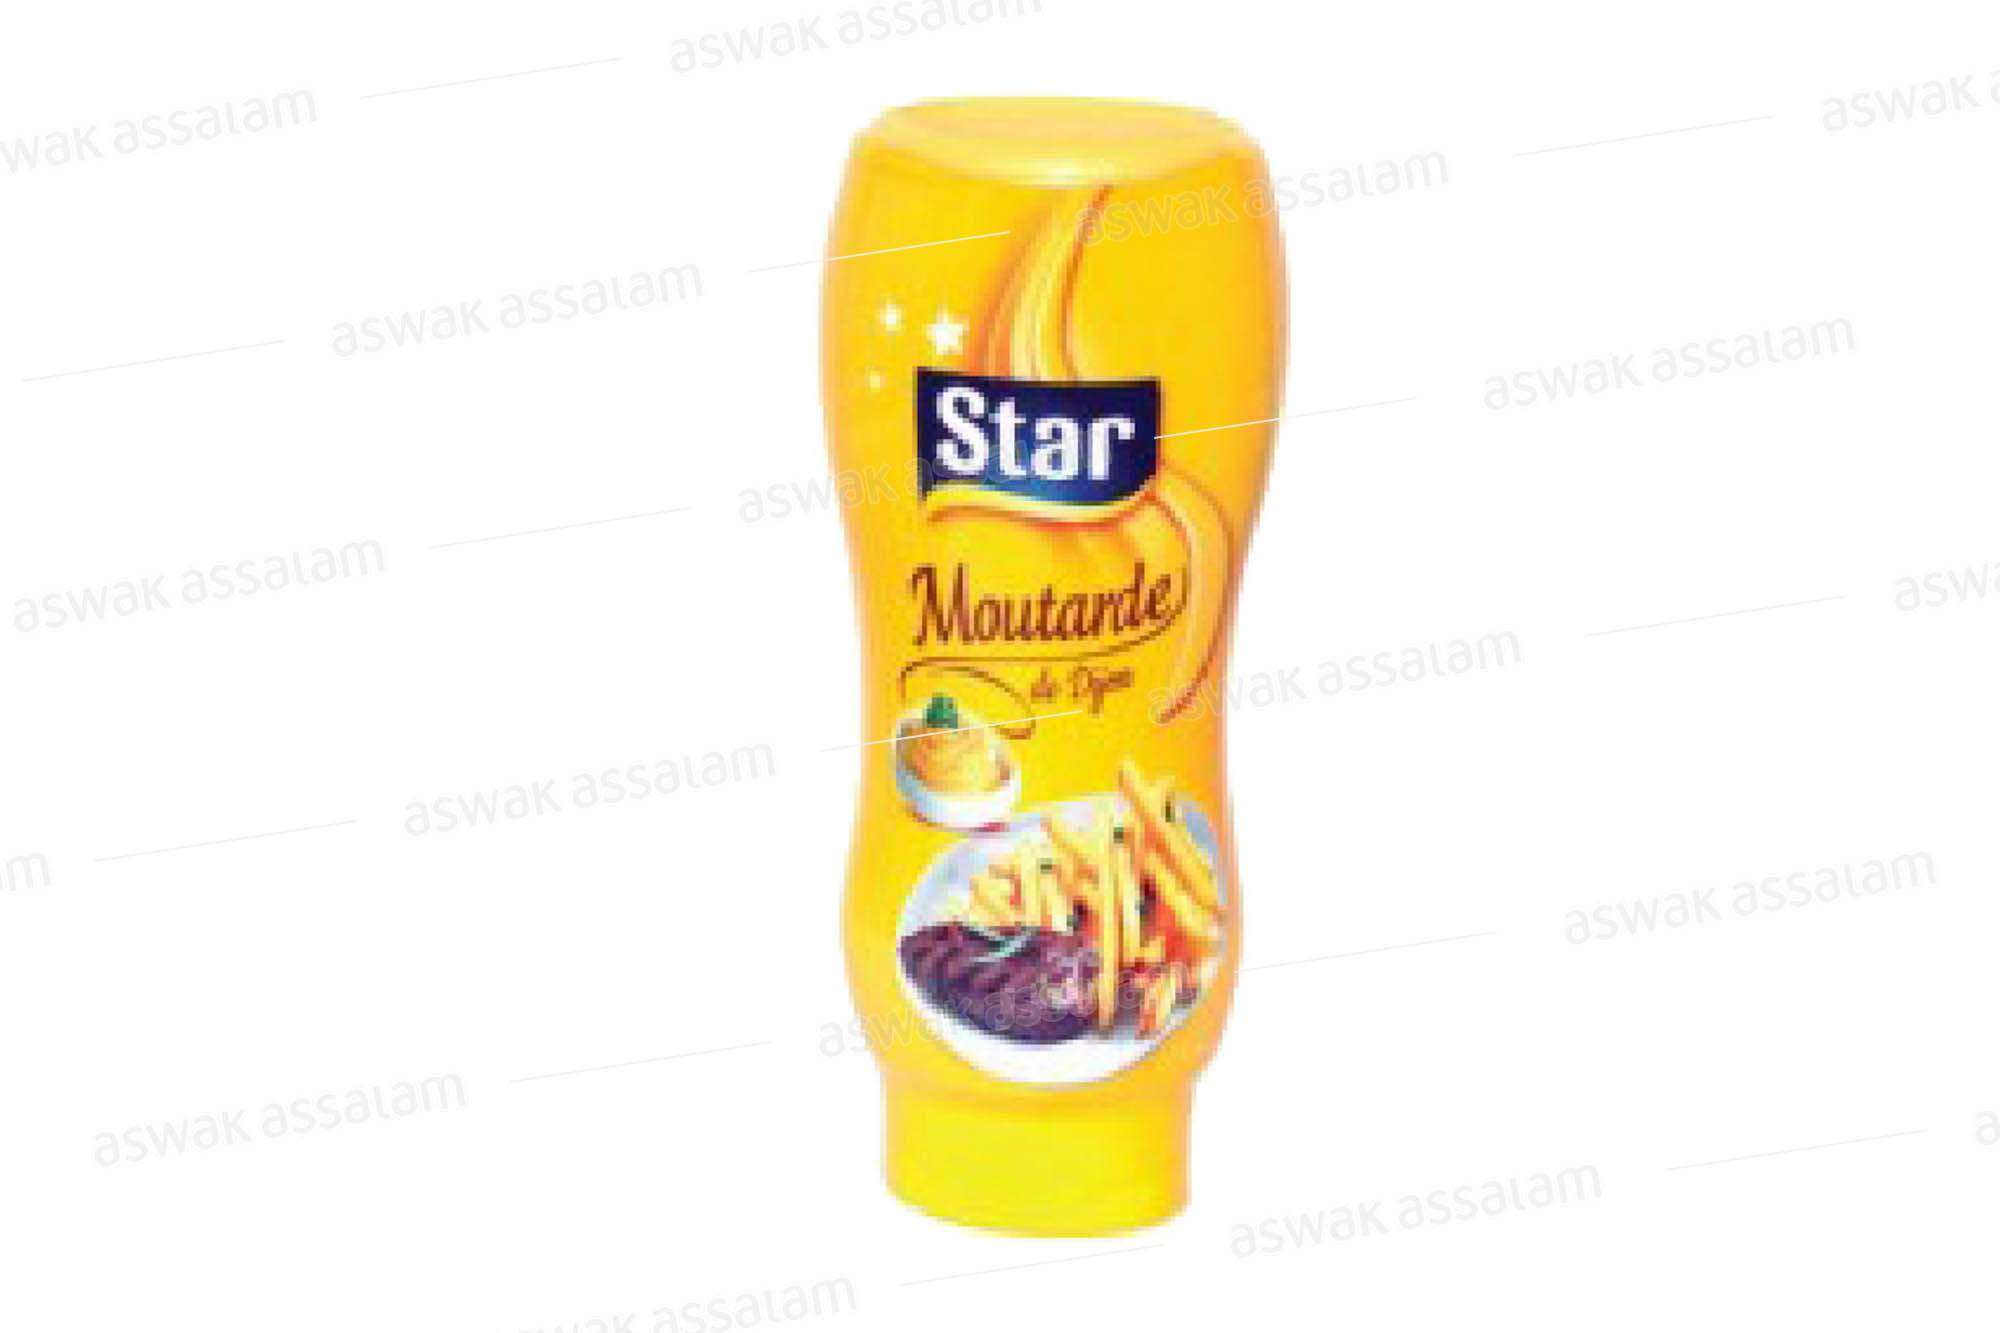 MOUTARDE 340G STAR